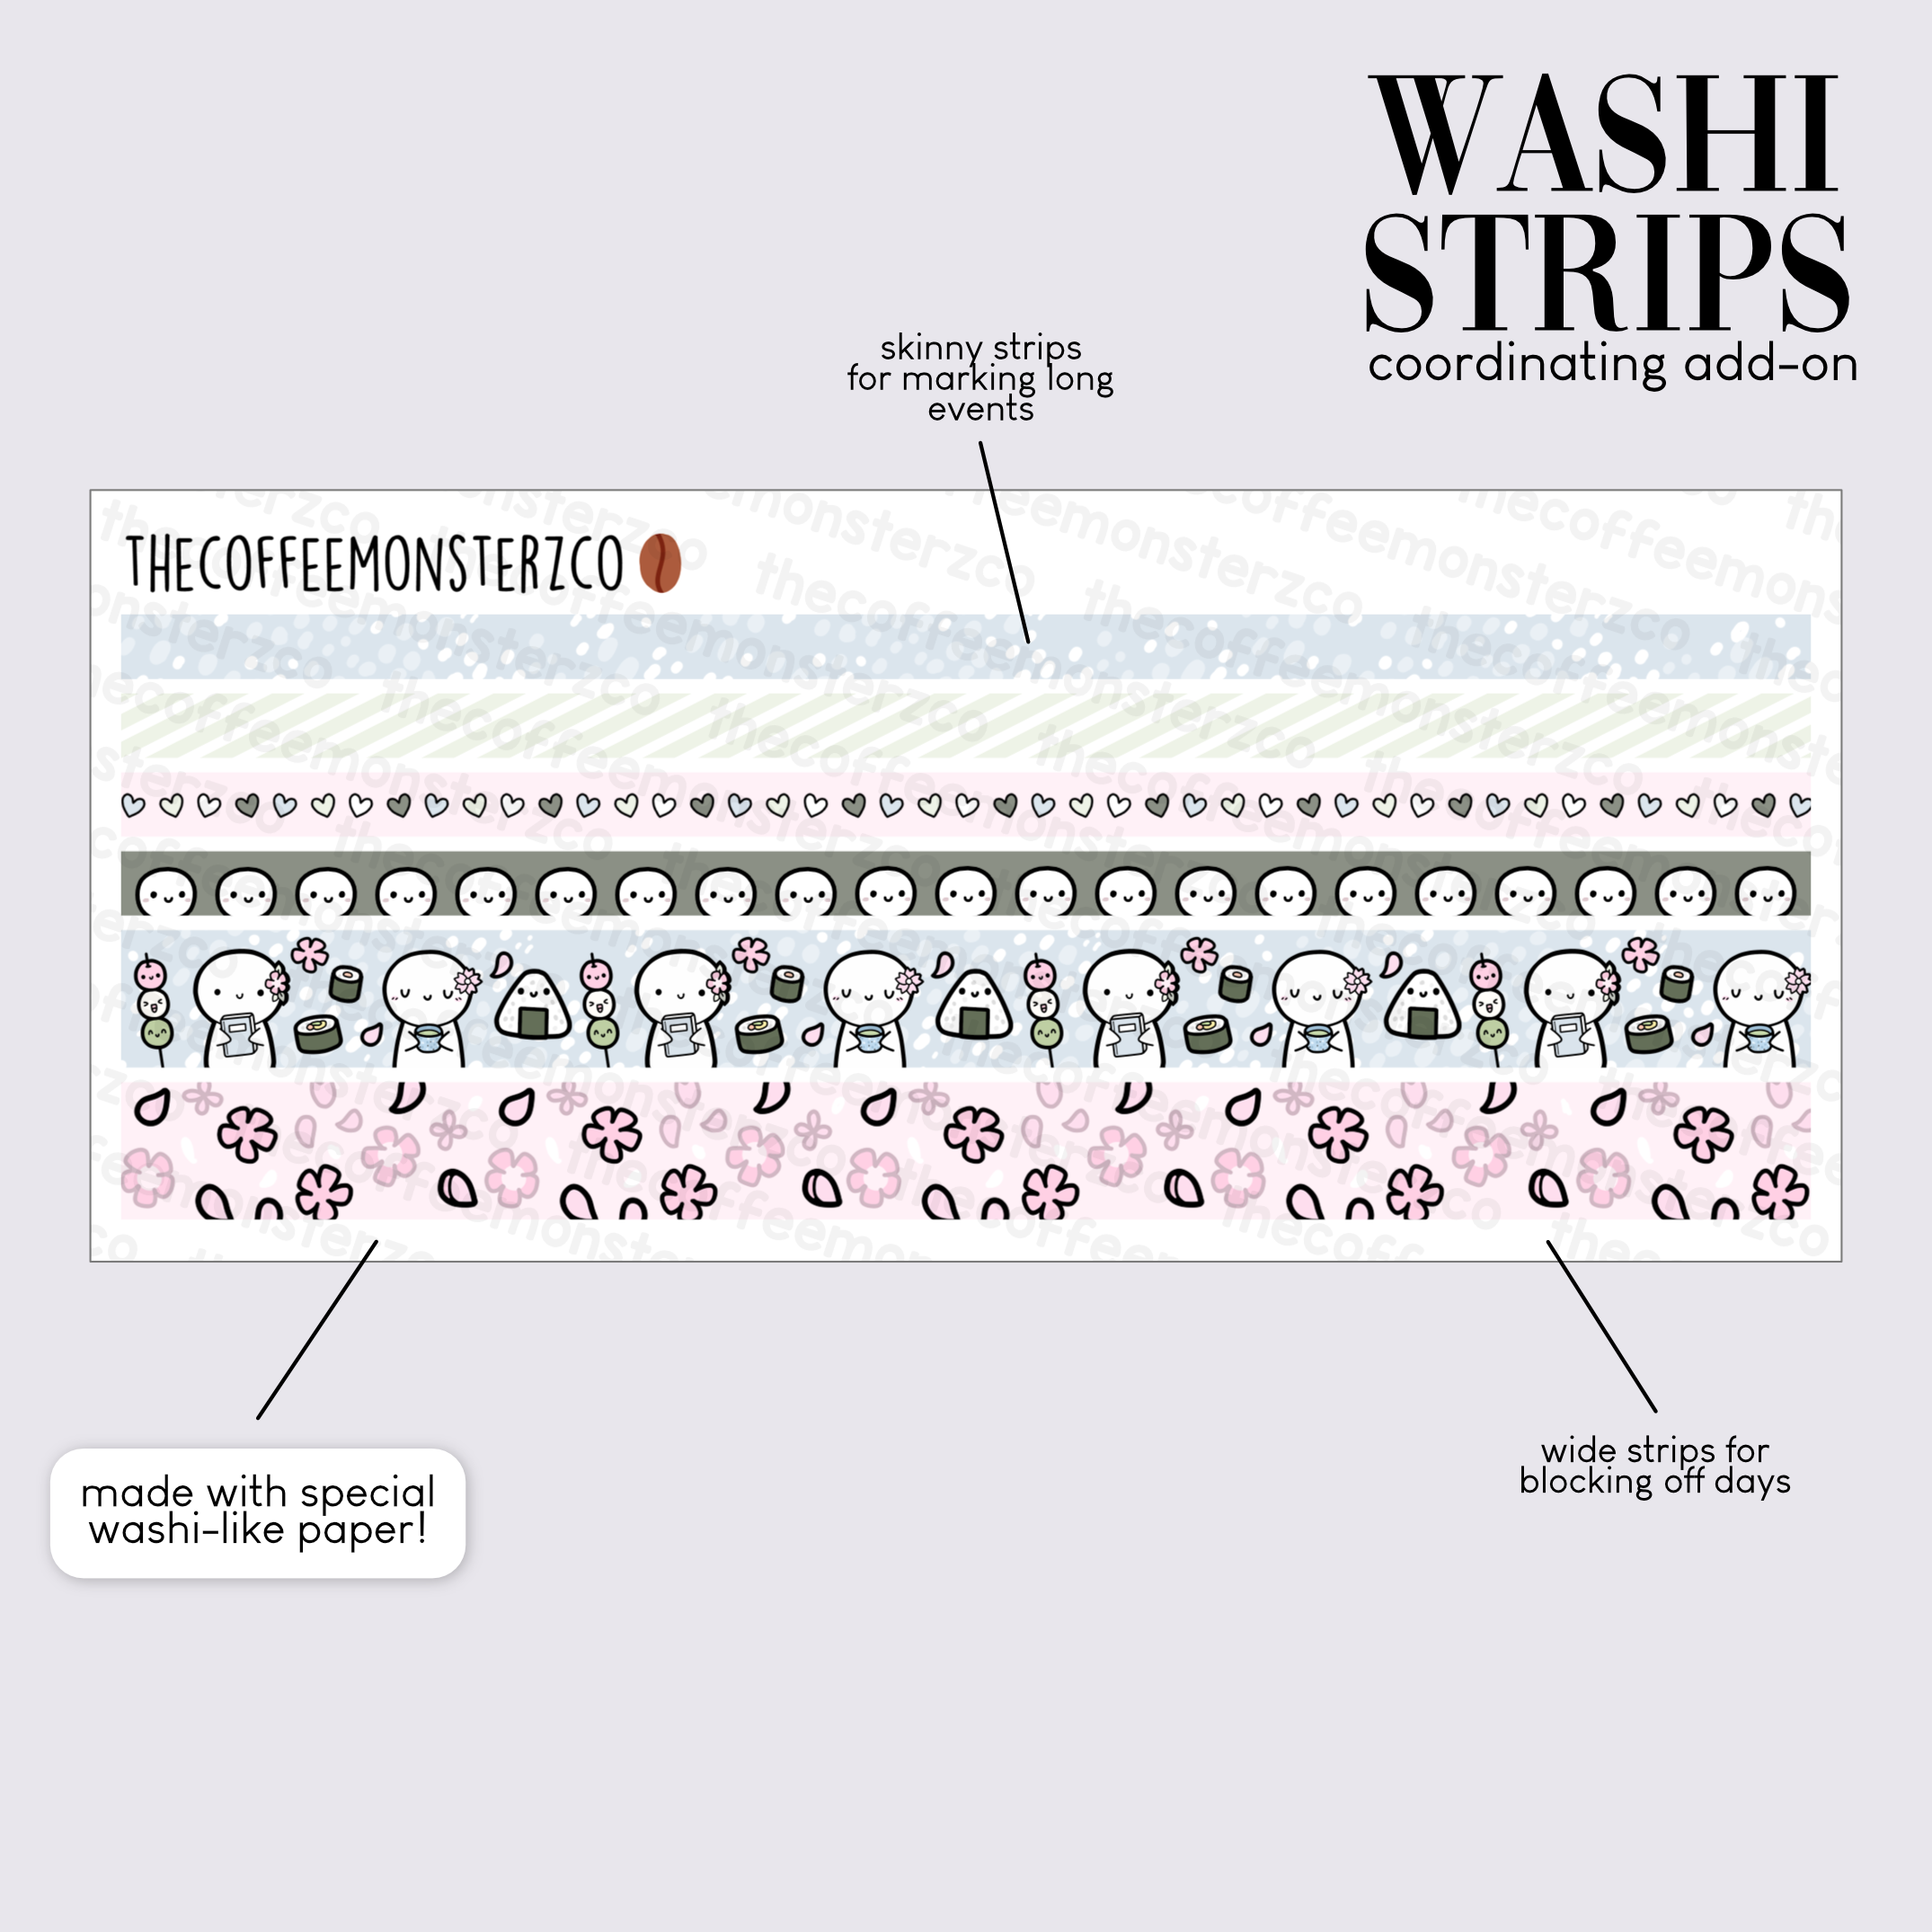 2023 Coordinating Add-ons - Washi Strips - Part 1